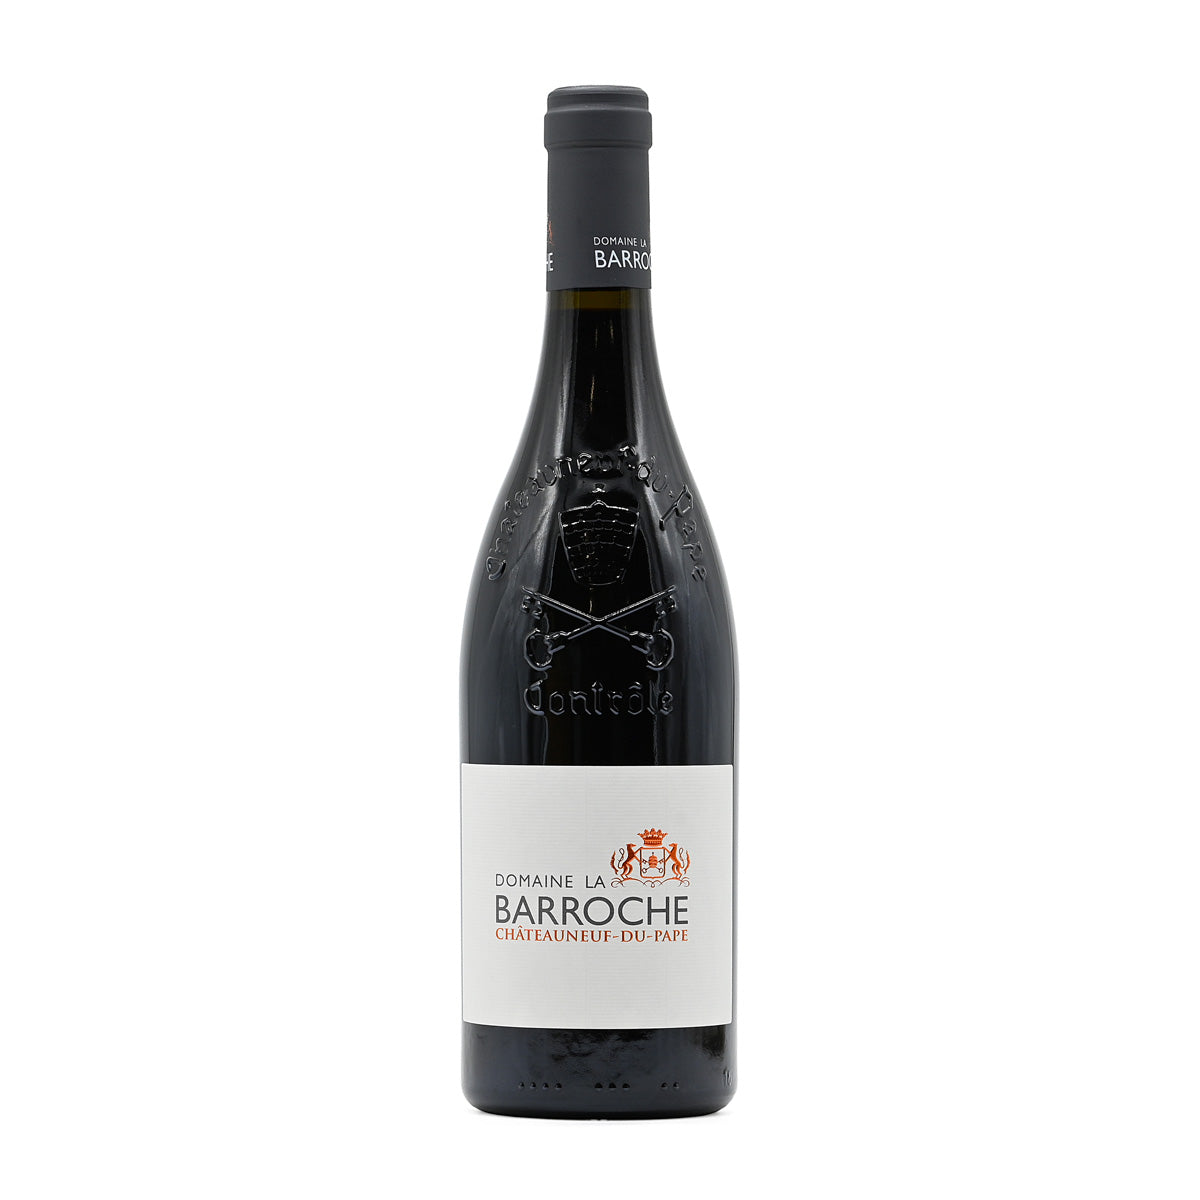 Domaine La Barroche Chateauneuf du Pape rouge Signature 2016, 750ml French red wine, made from a blend of Grenache, Mourvedre, Syrah, Cinsault, Vaccarese and other varieties, from Chateauneuf-du-Pape, Southern Rhone, France – GDV Fine Wines, Hong Kong